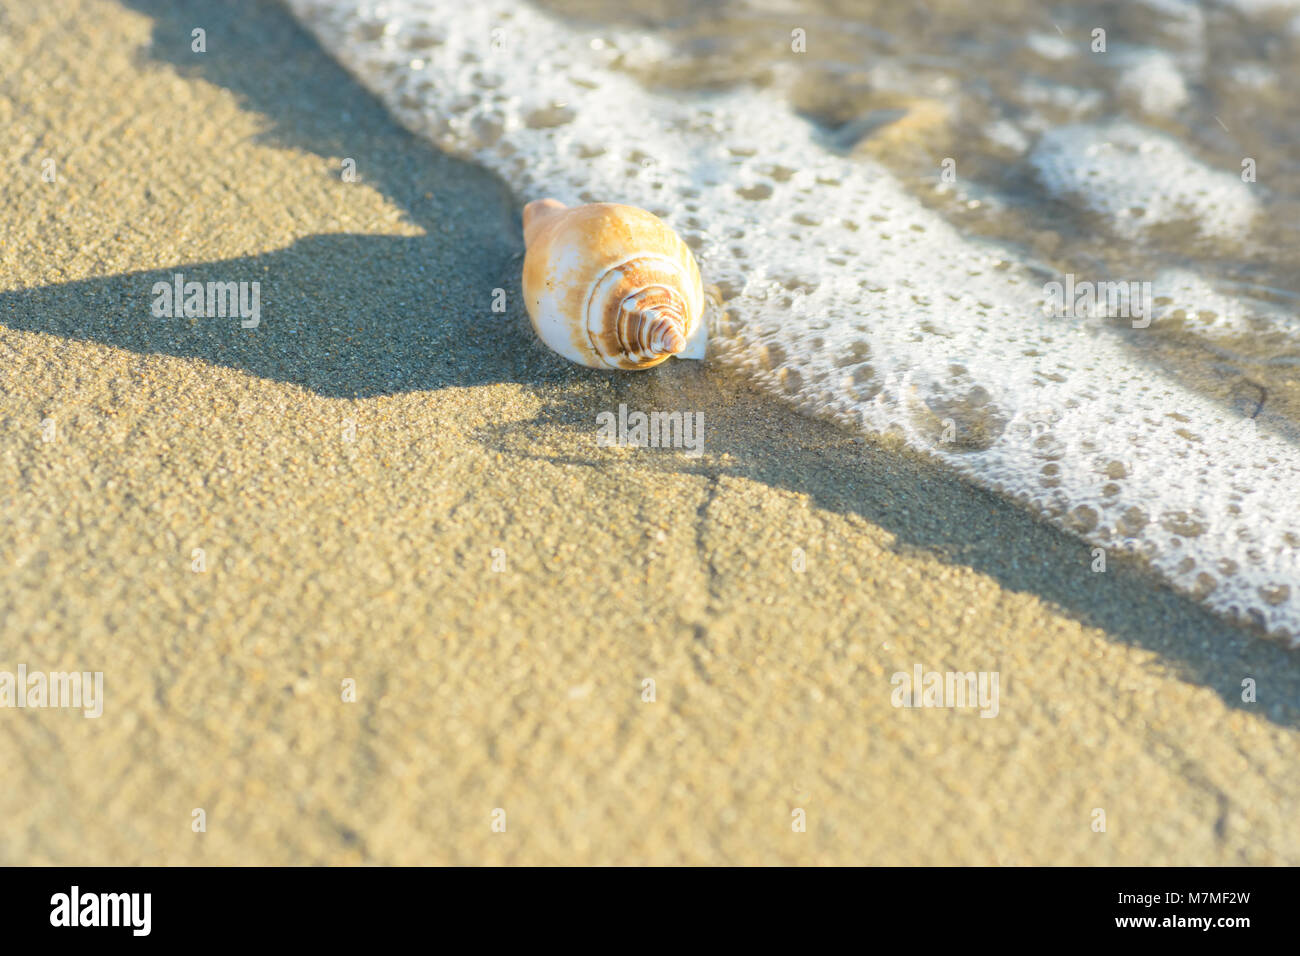 Beautiful White Beige Spiral Sea Shell on Beach Sand Washed by Foamy Wave. Transparent Water. Golden Sunlight Soft Pastel Colors. Summer Vacation Trav Stock Photo